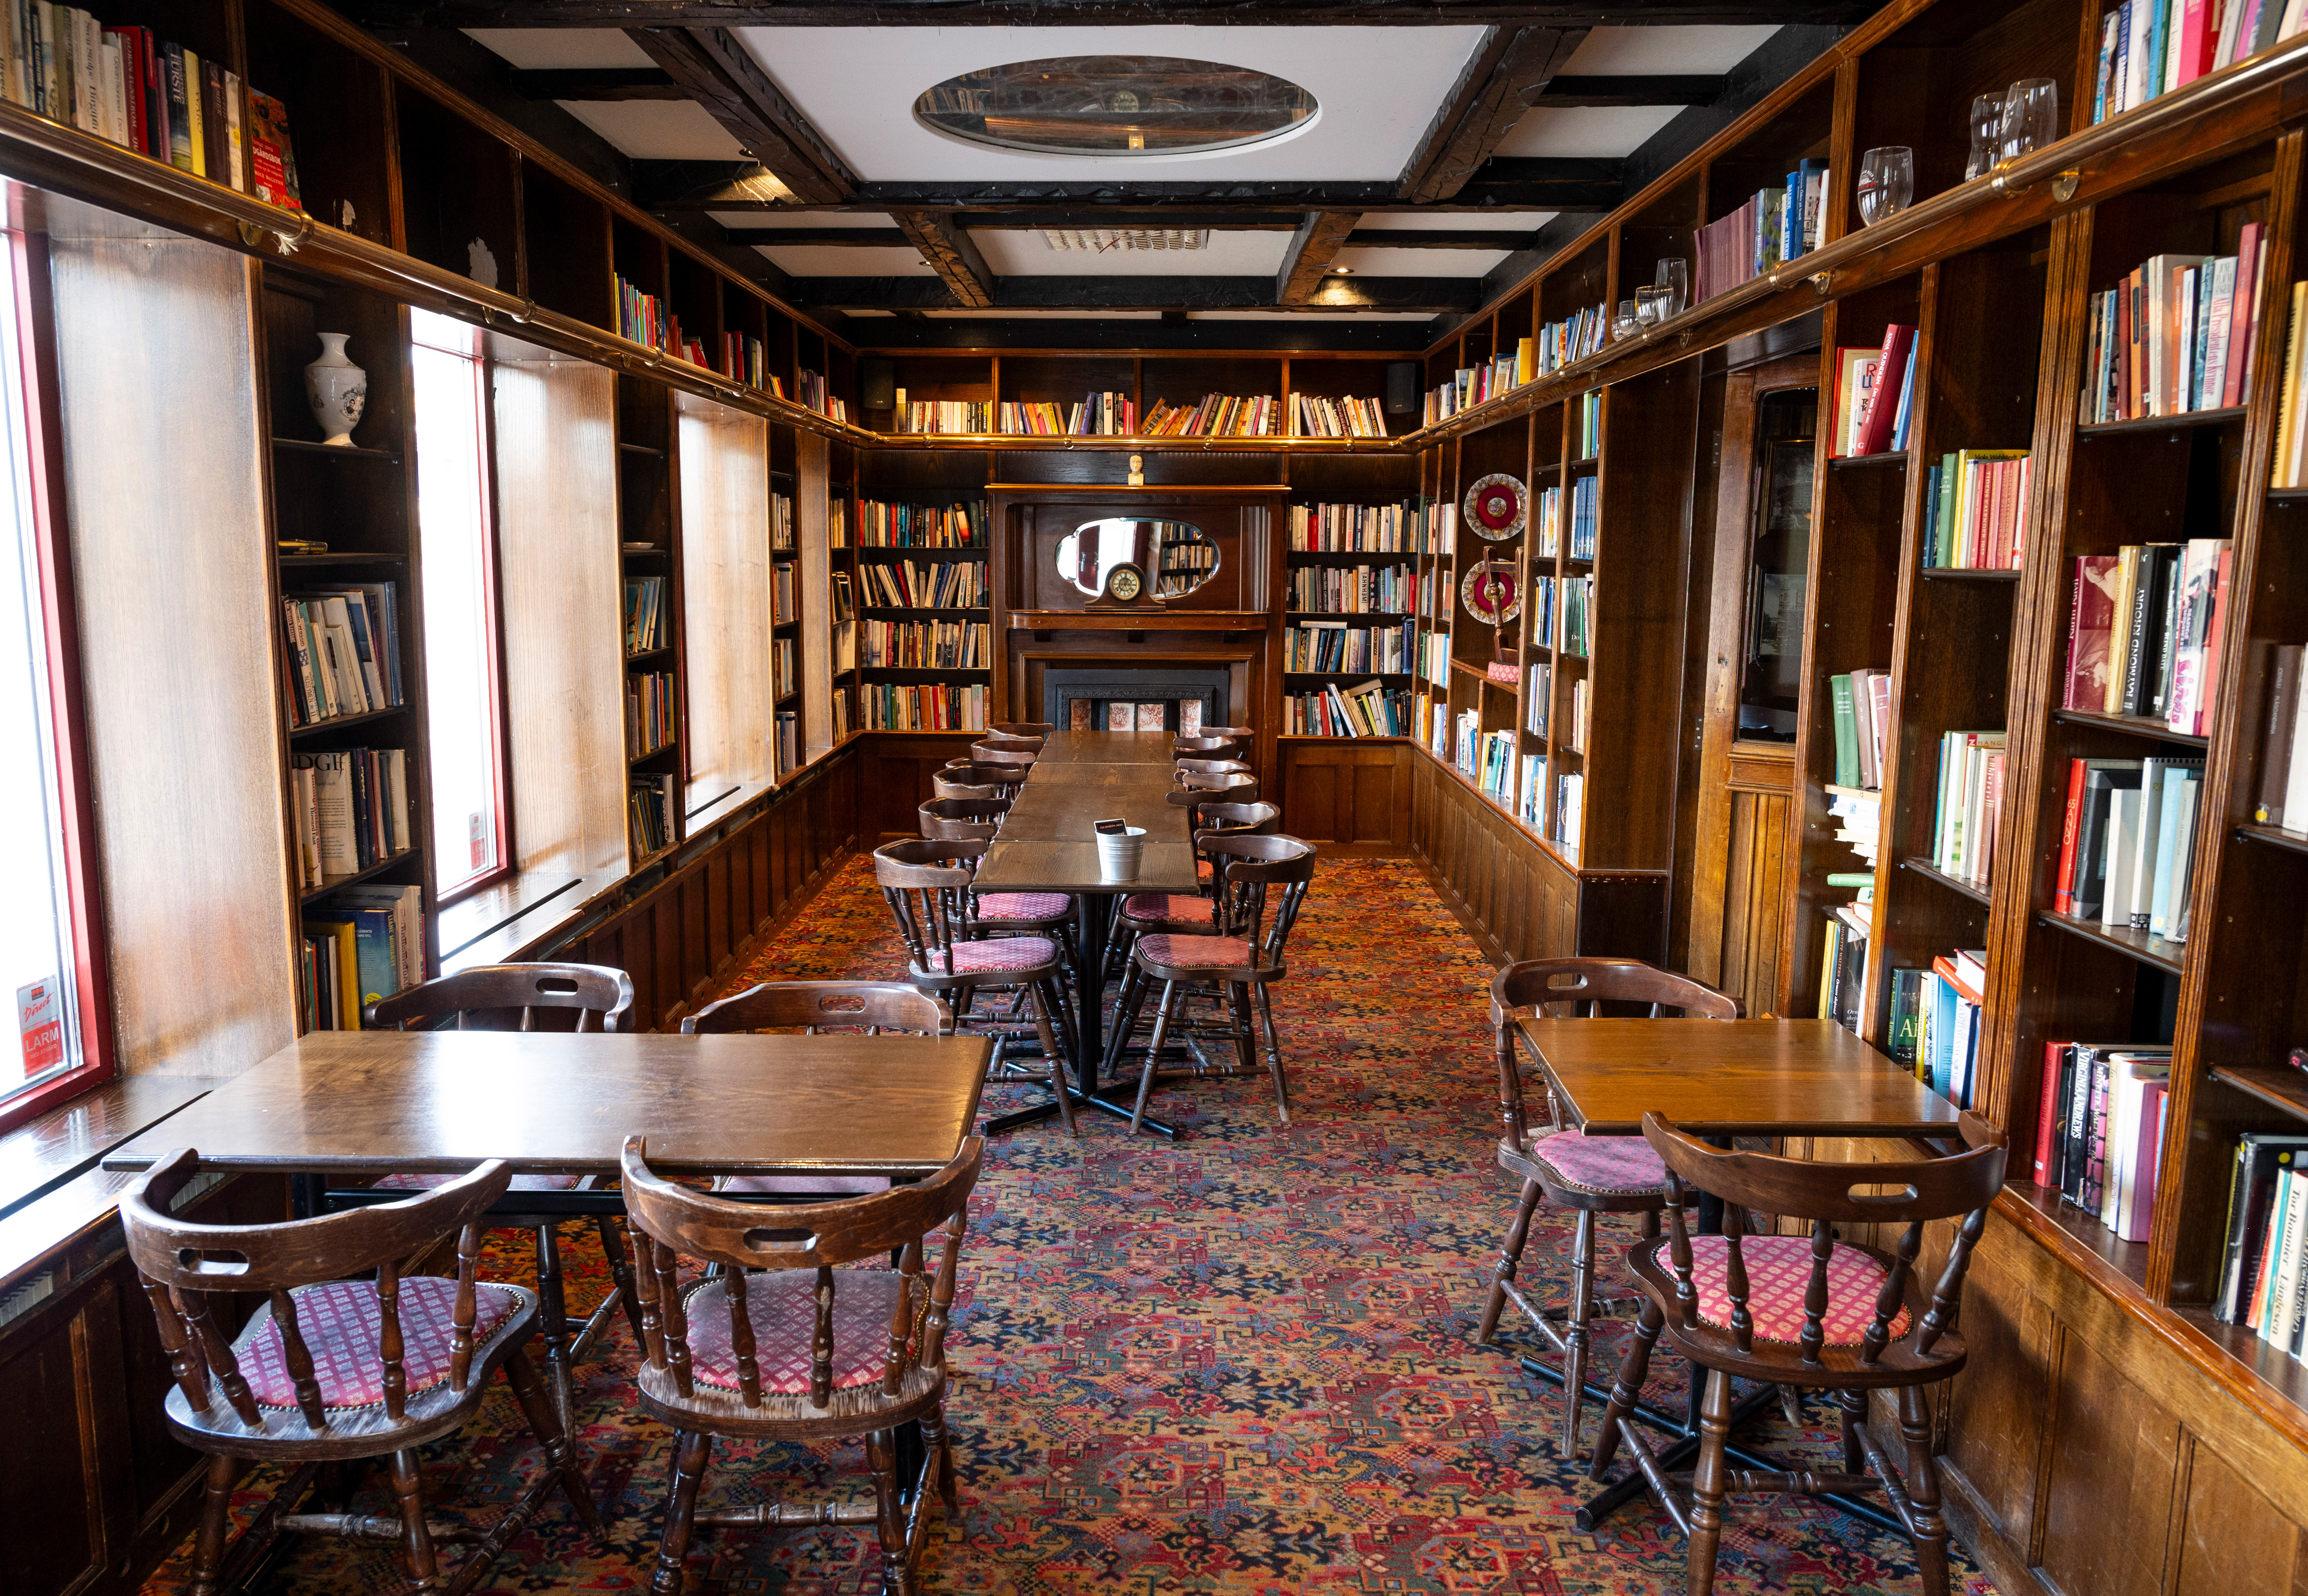 Dining room in library with books along the walls and dining table